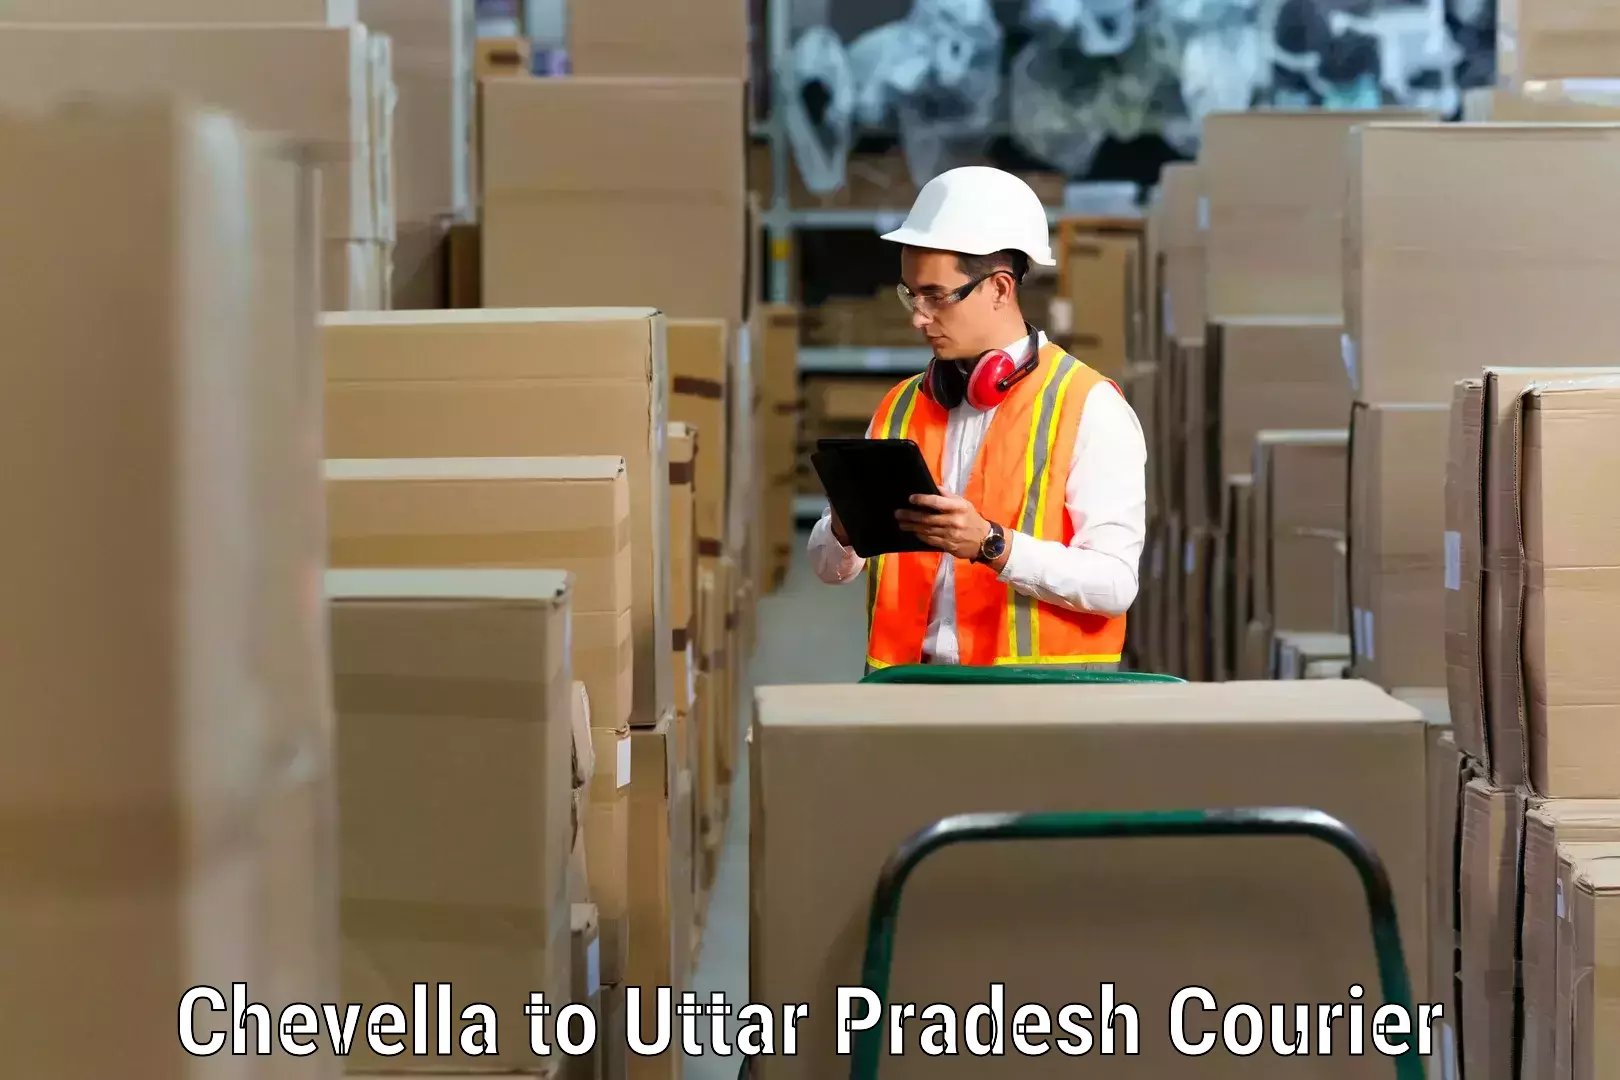 Furniture moving experts in Chevella to Allahabad